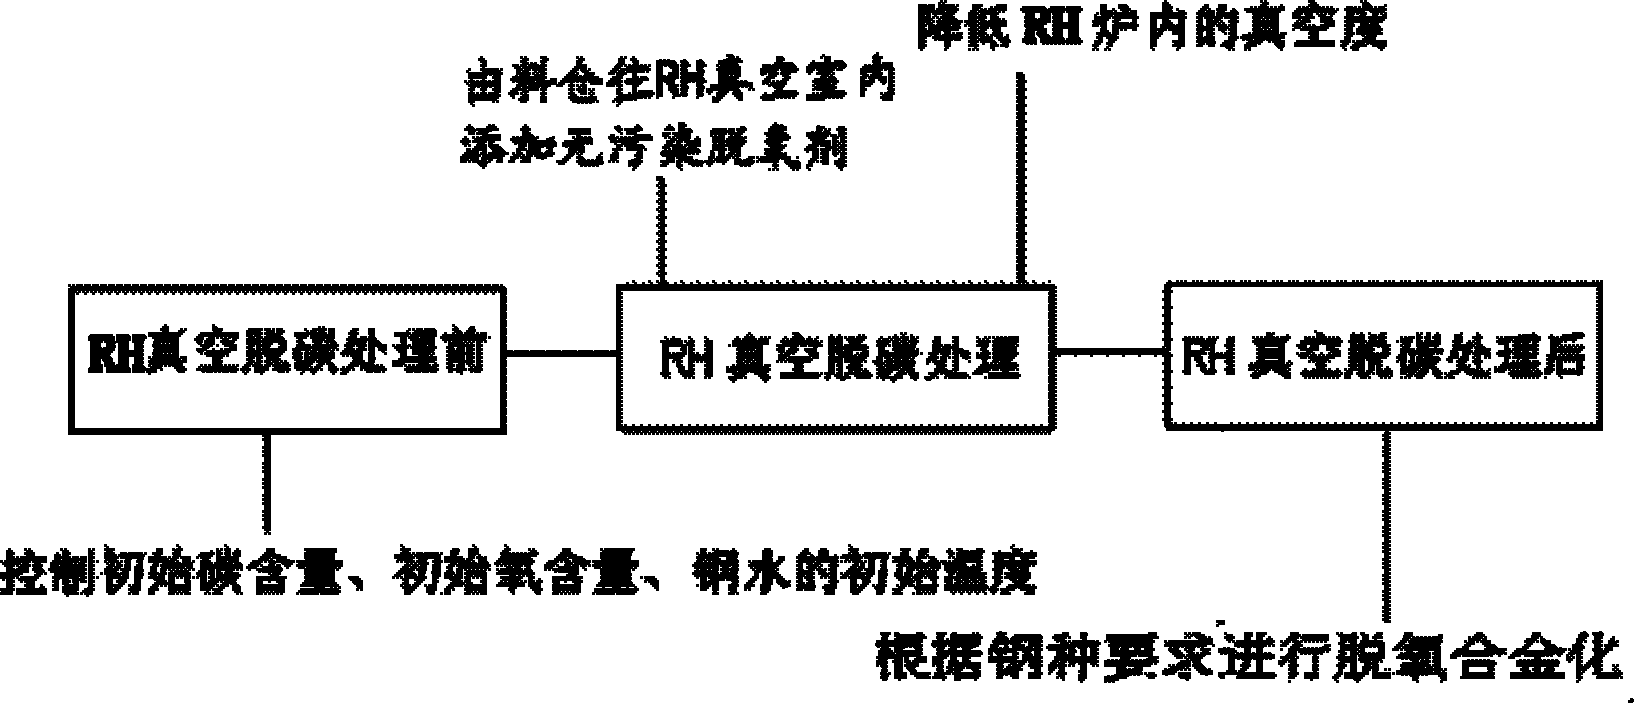 Process method for reducing RH vacuum decarbonization end-point oxygen content of ultra-low-carbon steel